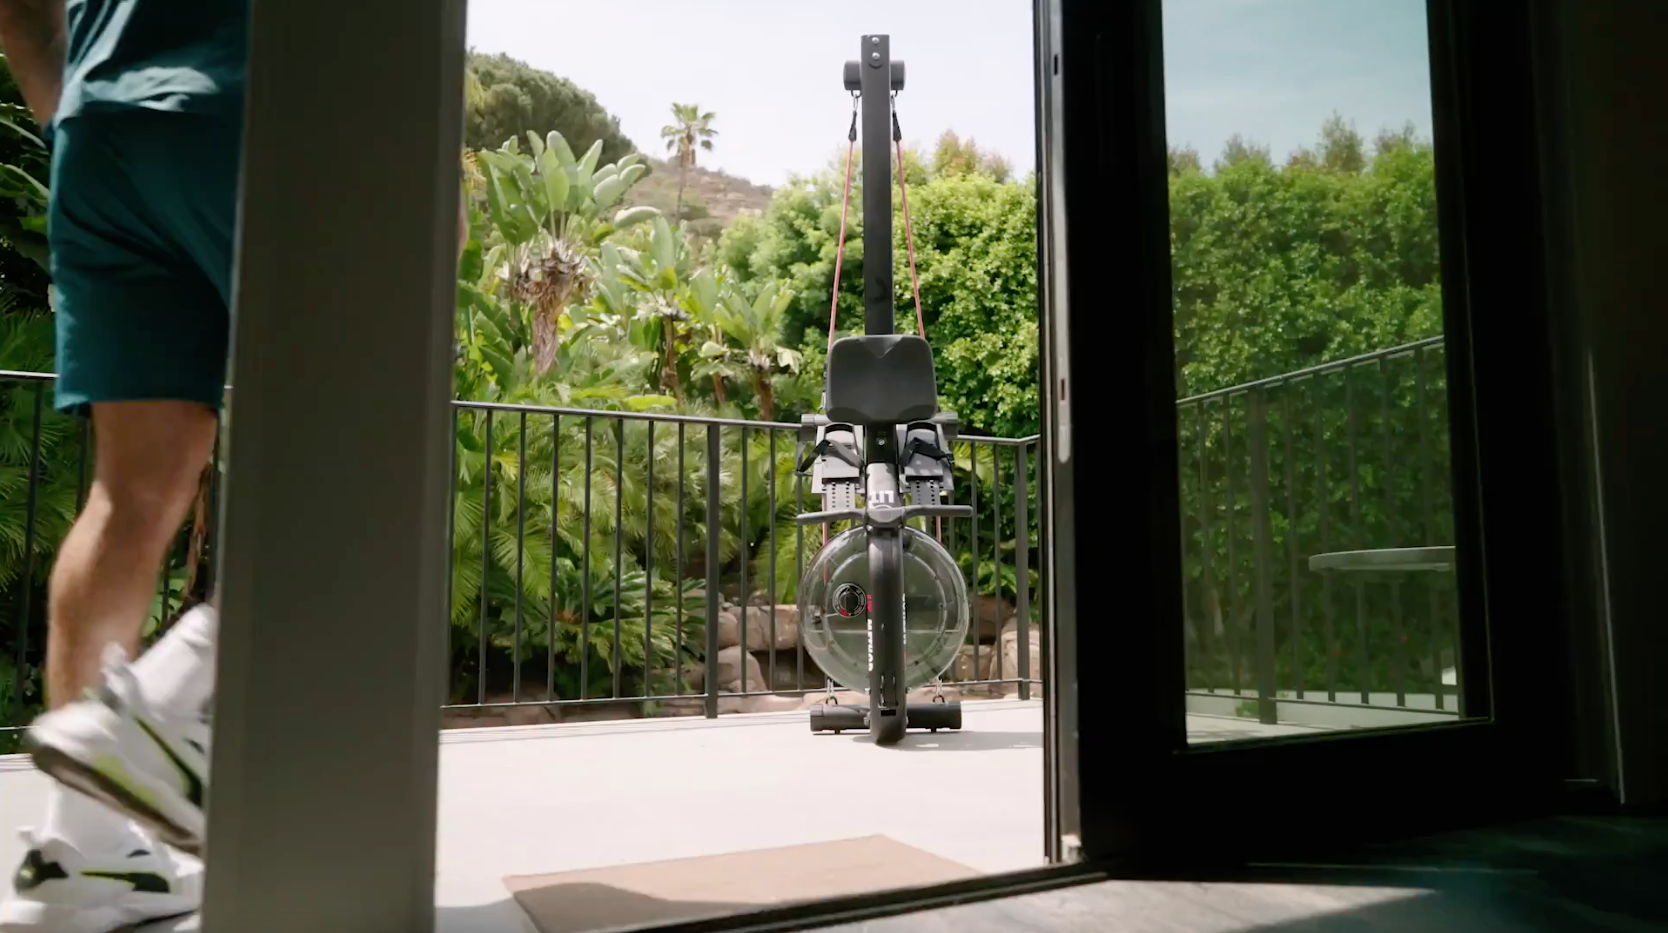 The Lit Strength Machine outside on California patio with green bushes